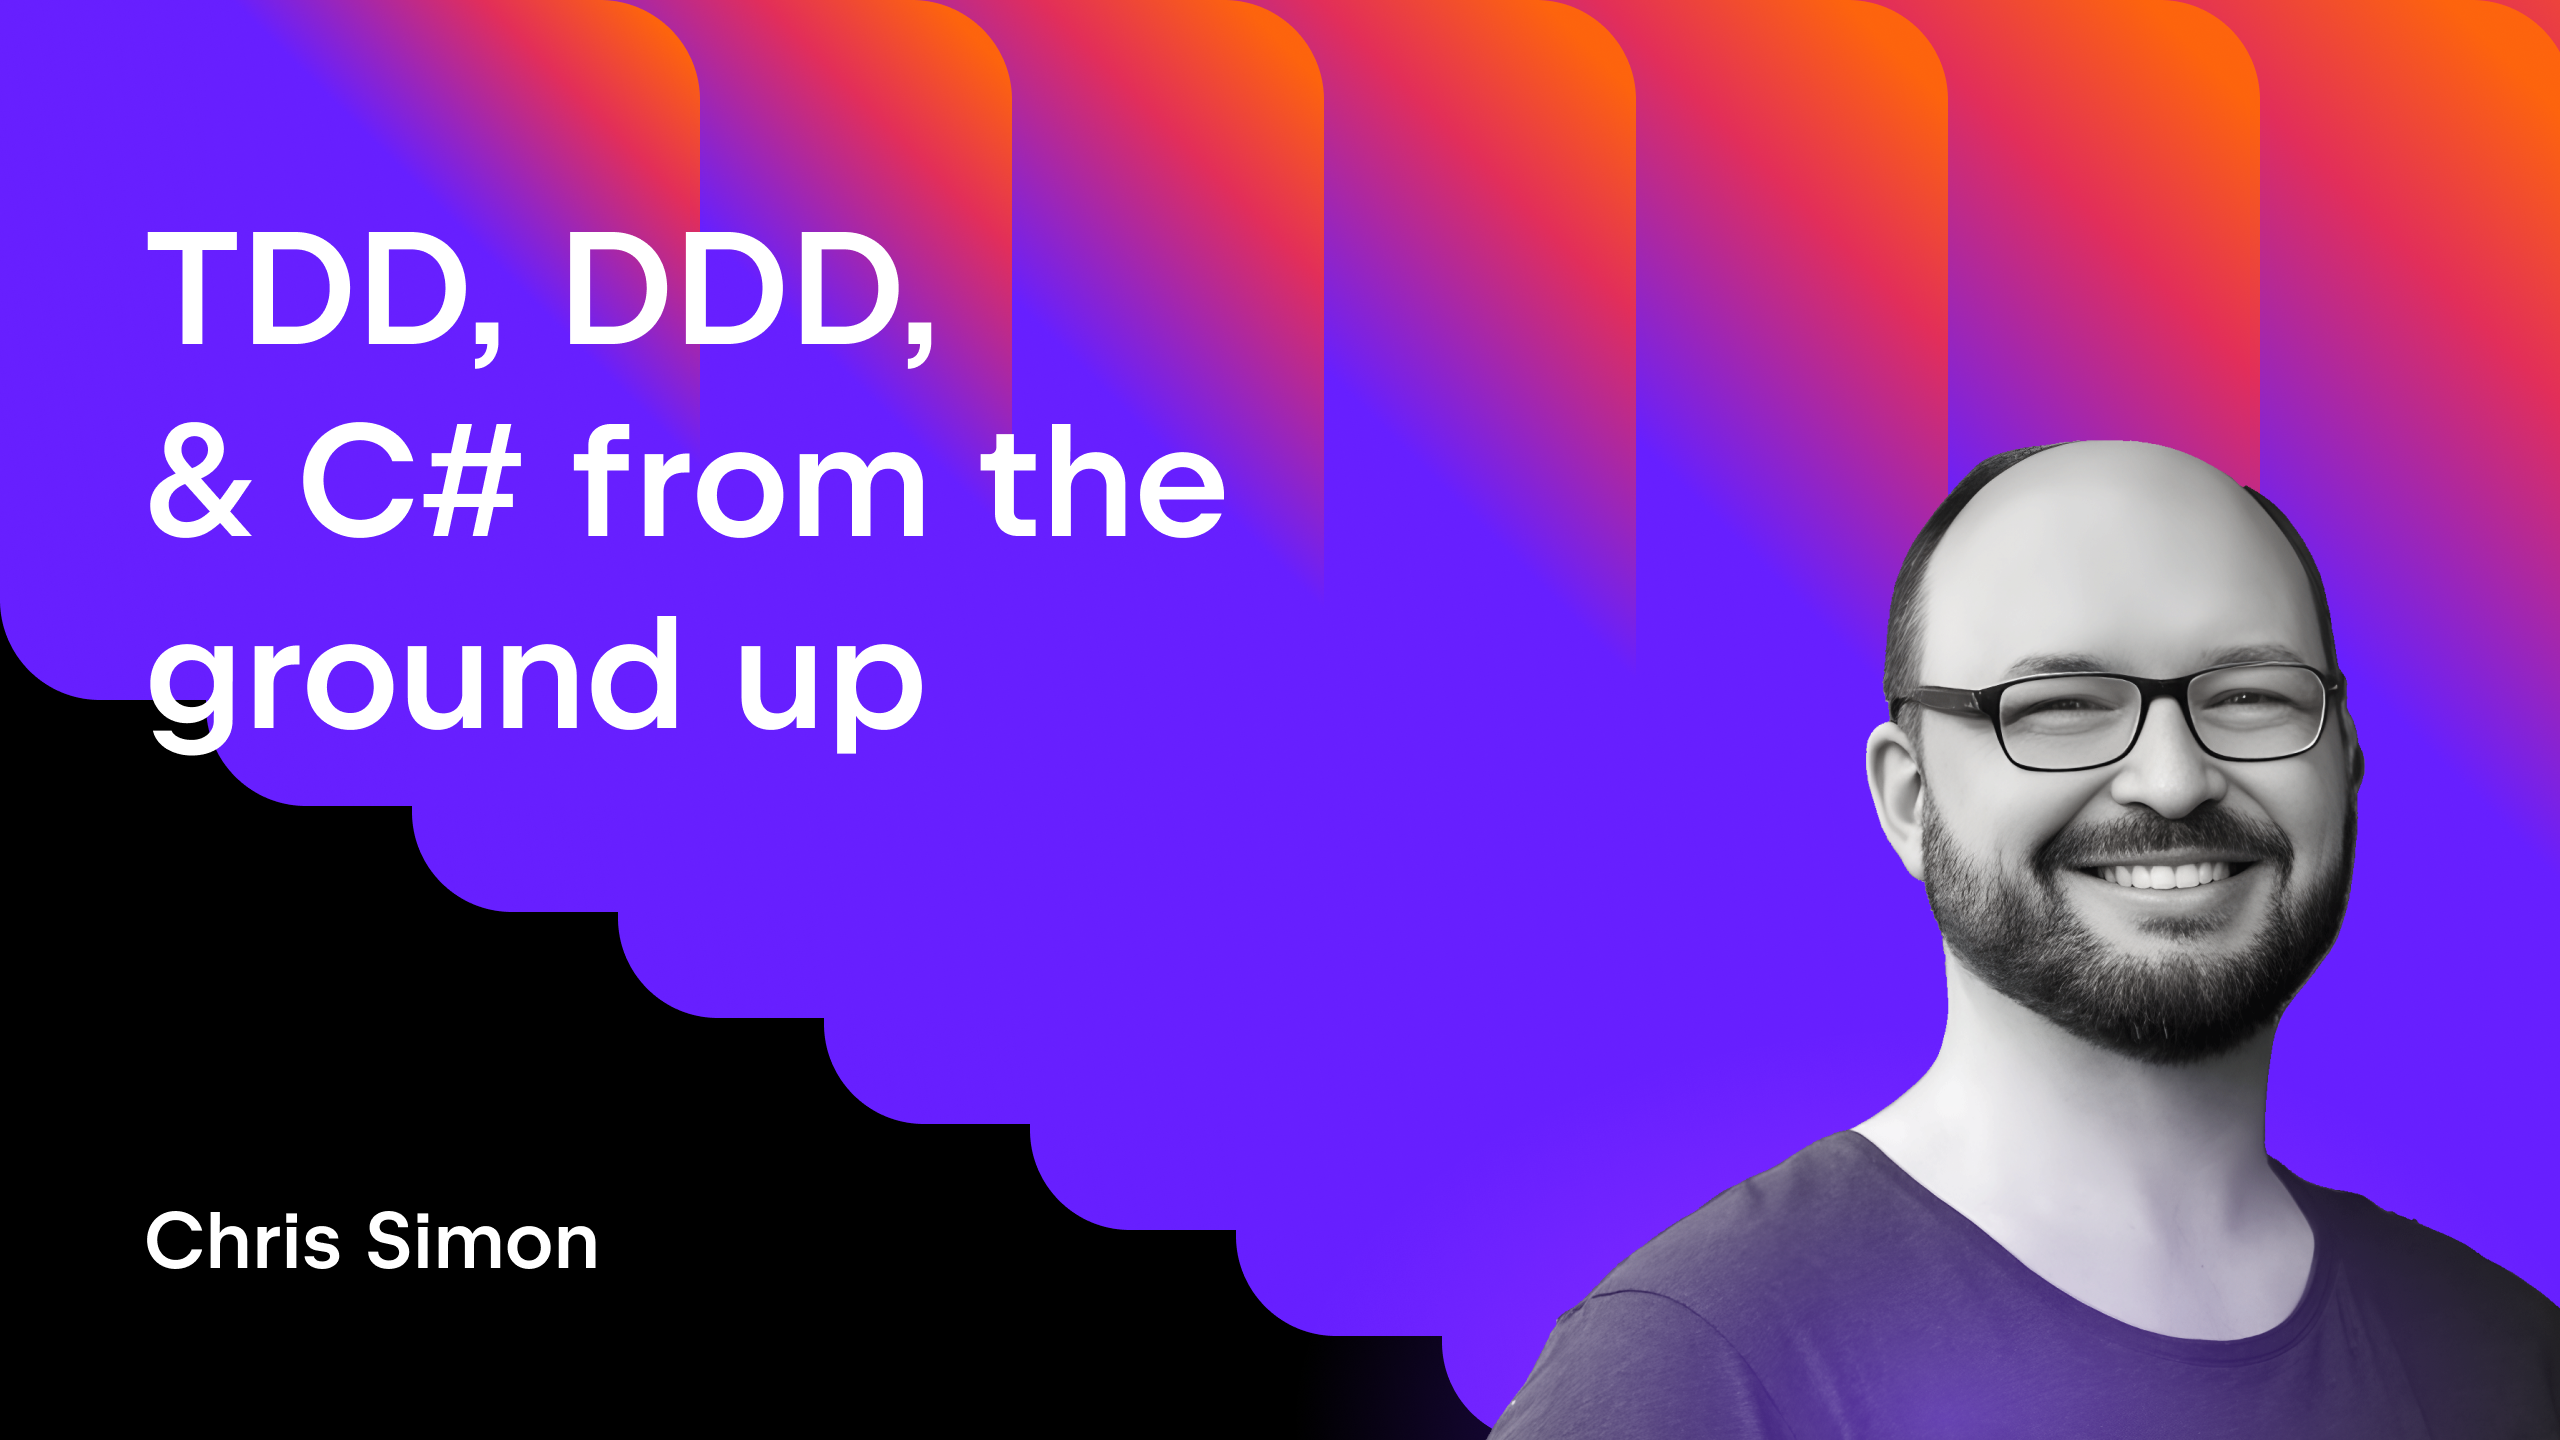 Chris Simon presents Test Driven Development, Domain Driven Design, &
C# from the ground up – 